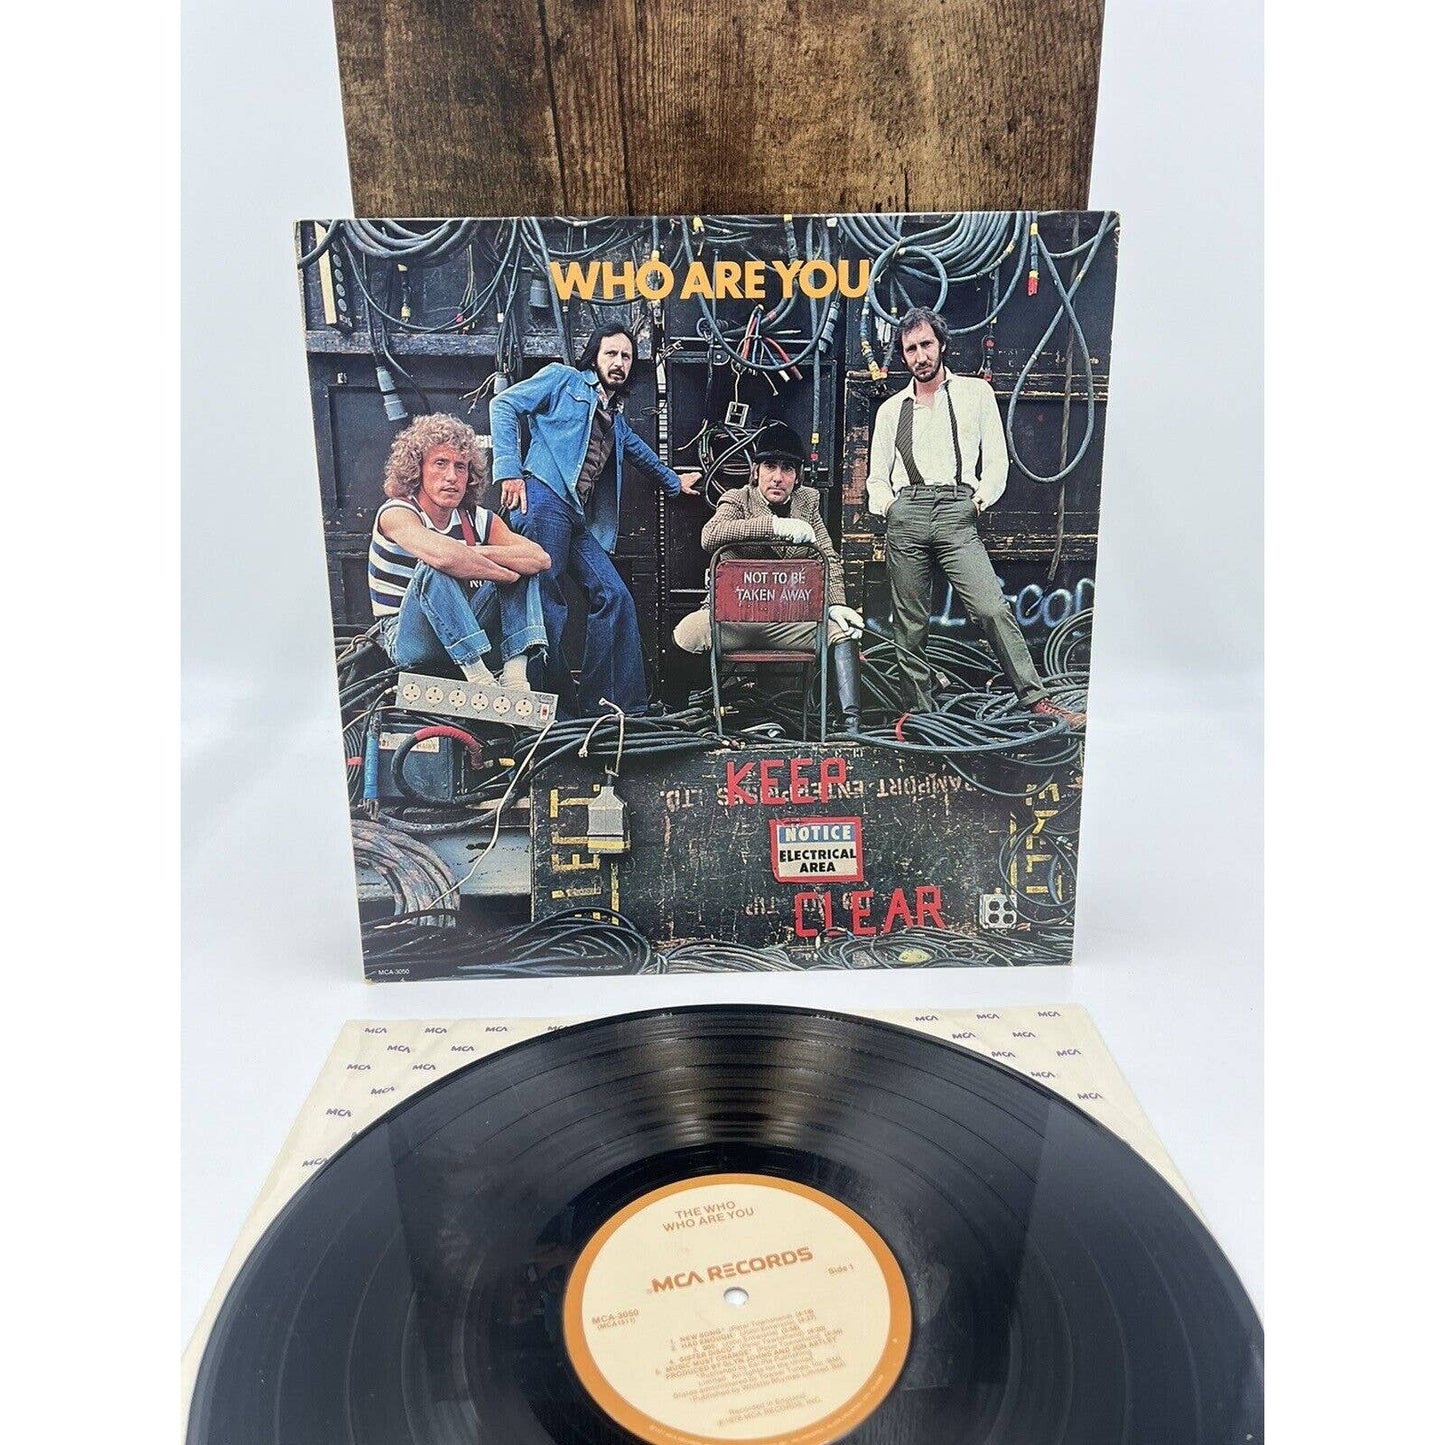 The Who - Who Are You - 1978 MCA Records Pressing MCA-3050